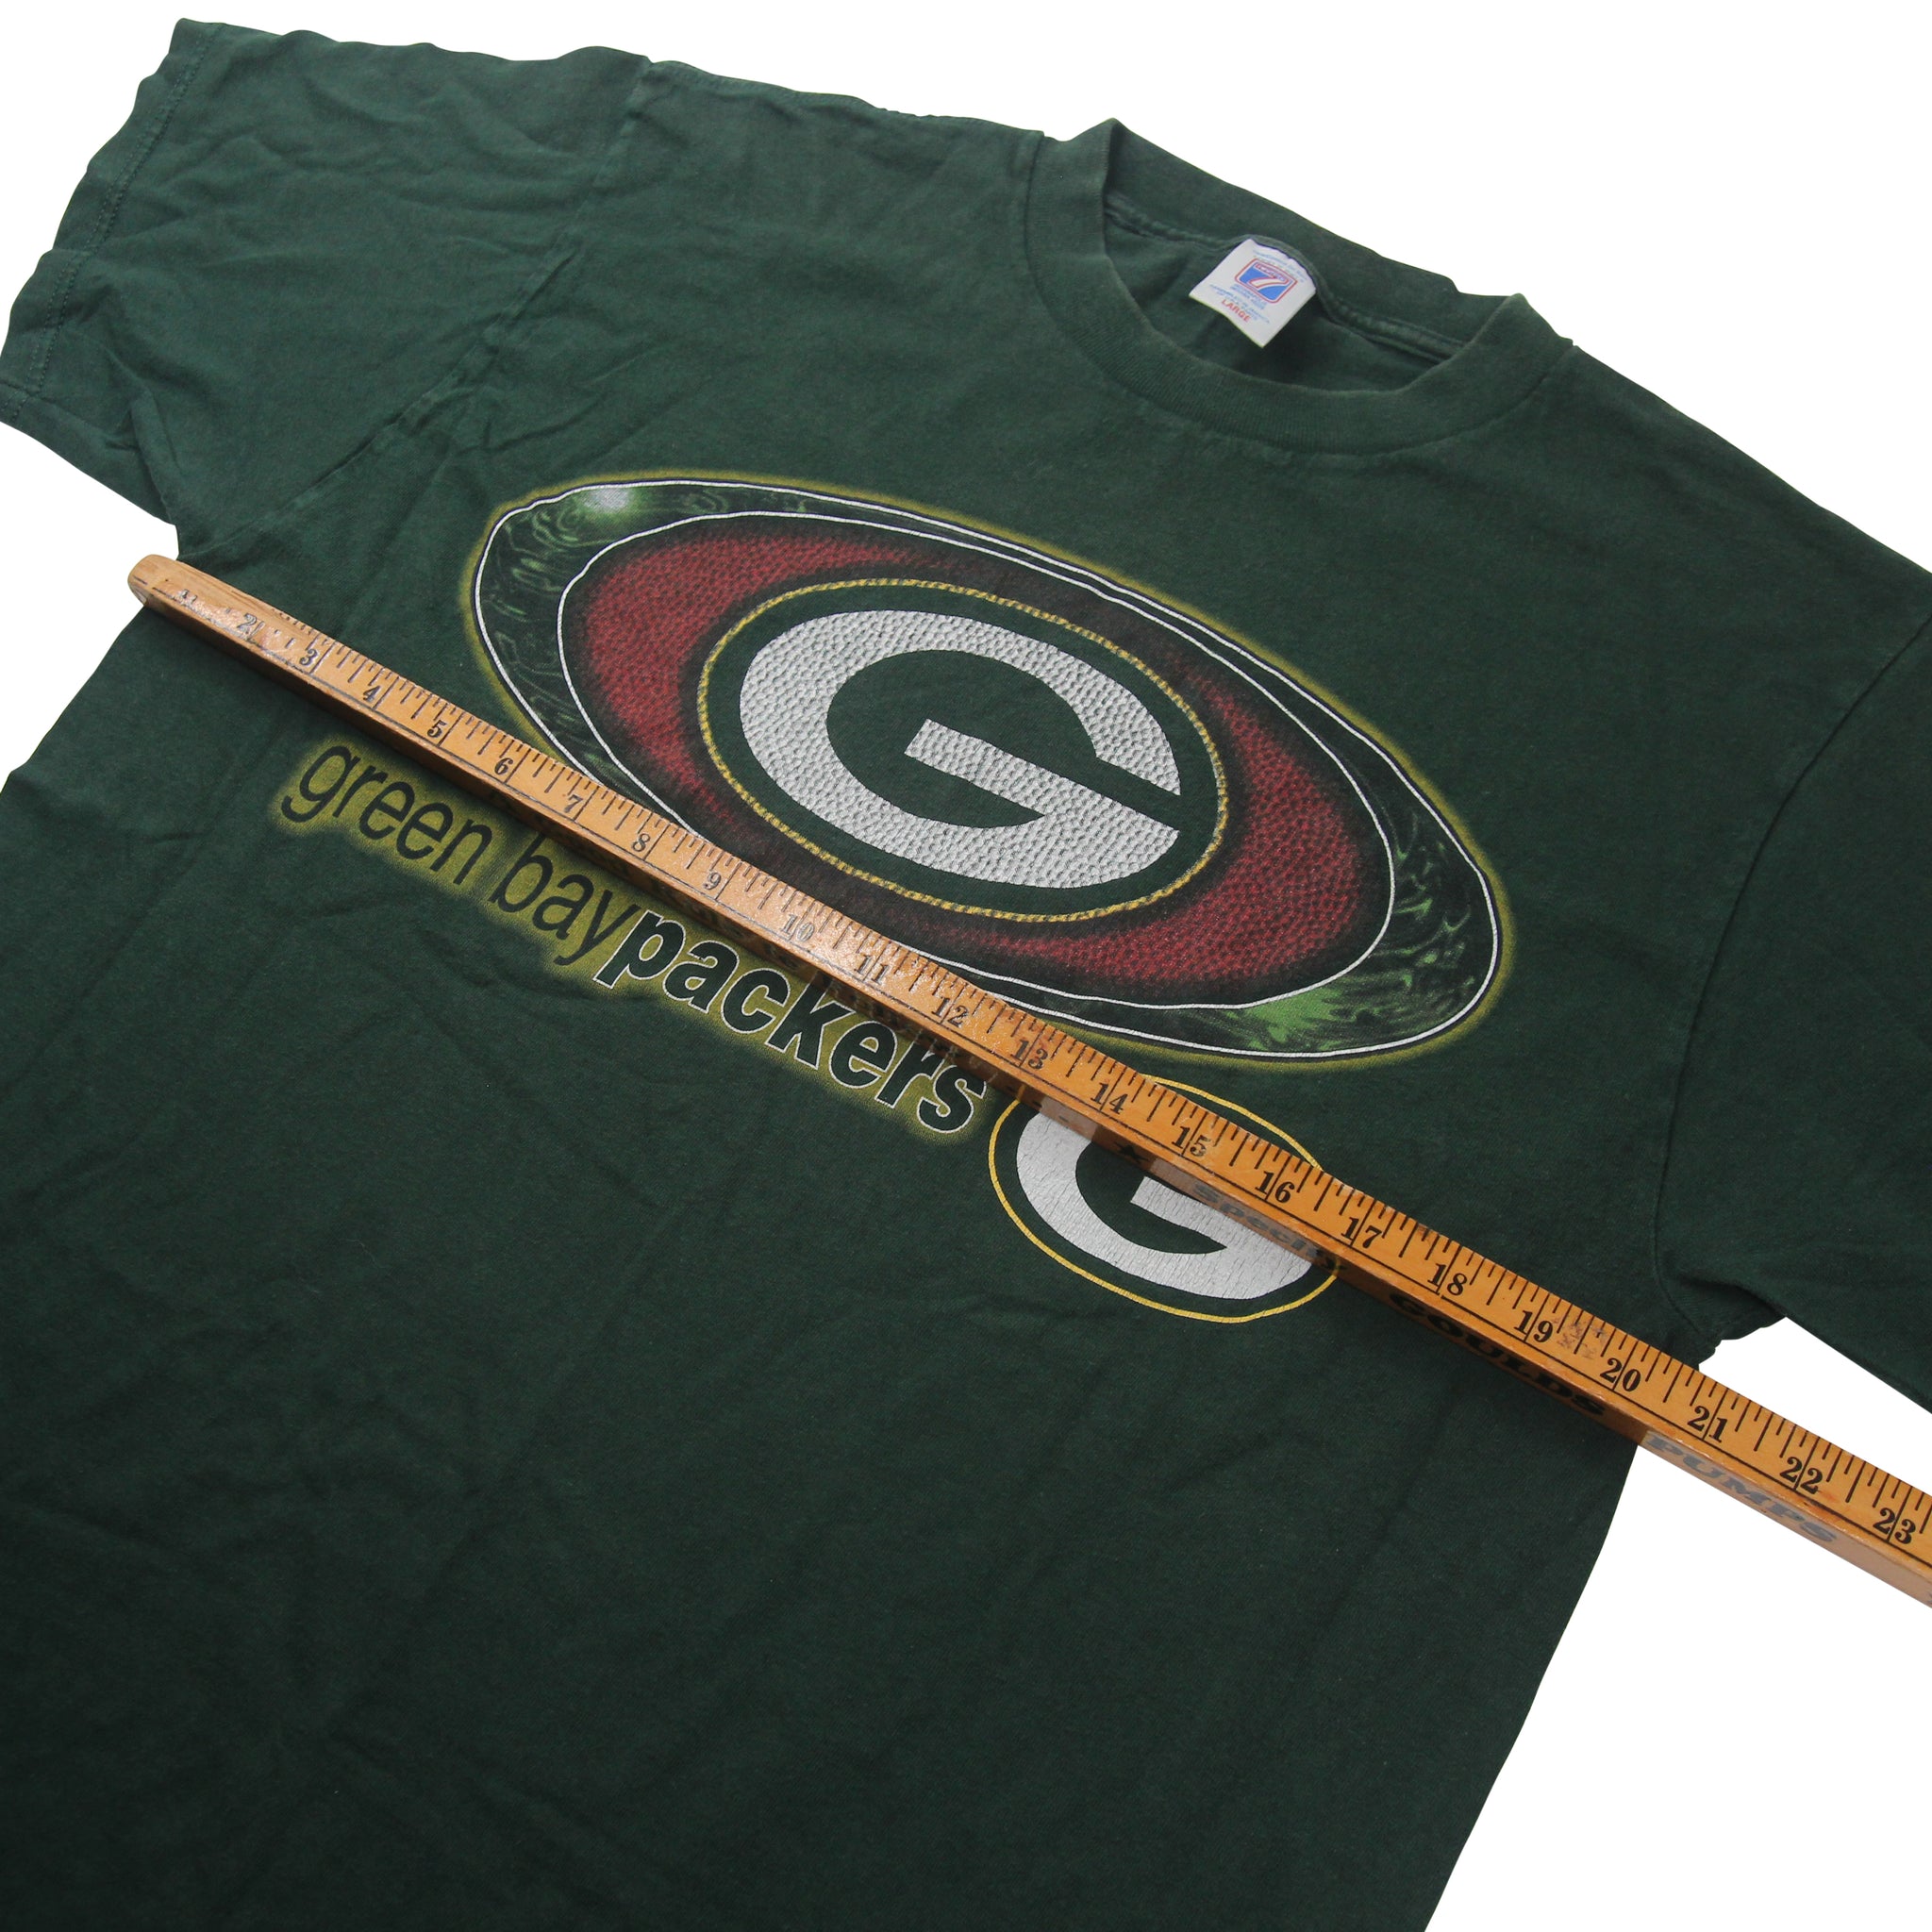 Green Bay Packers Graphic Tee